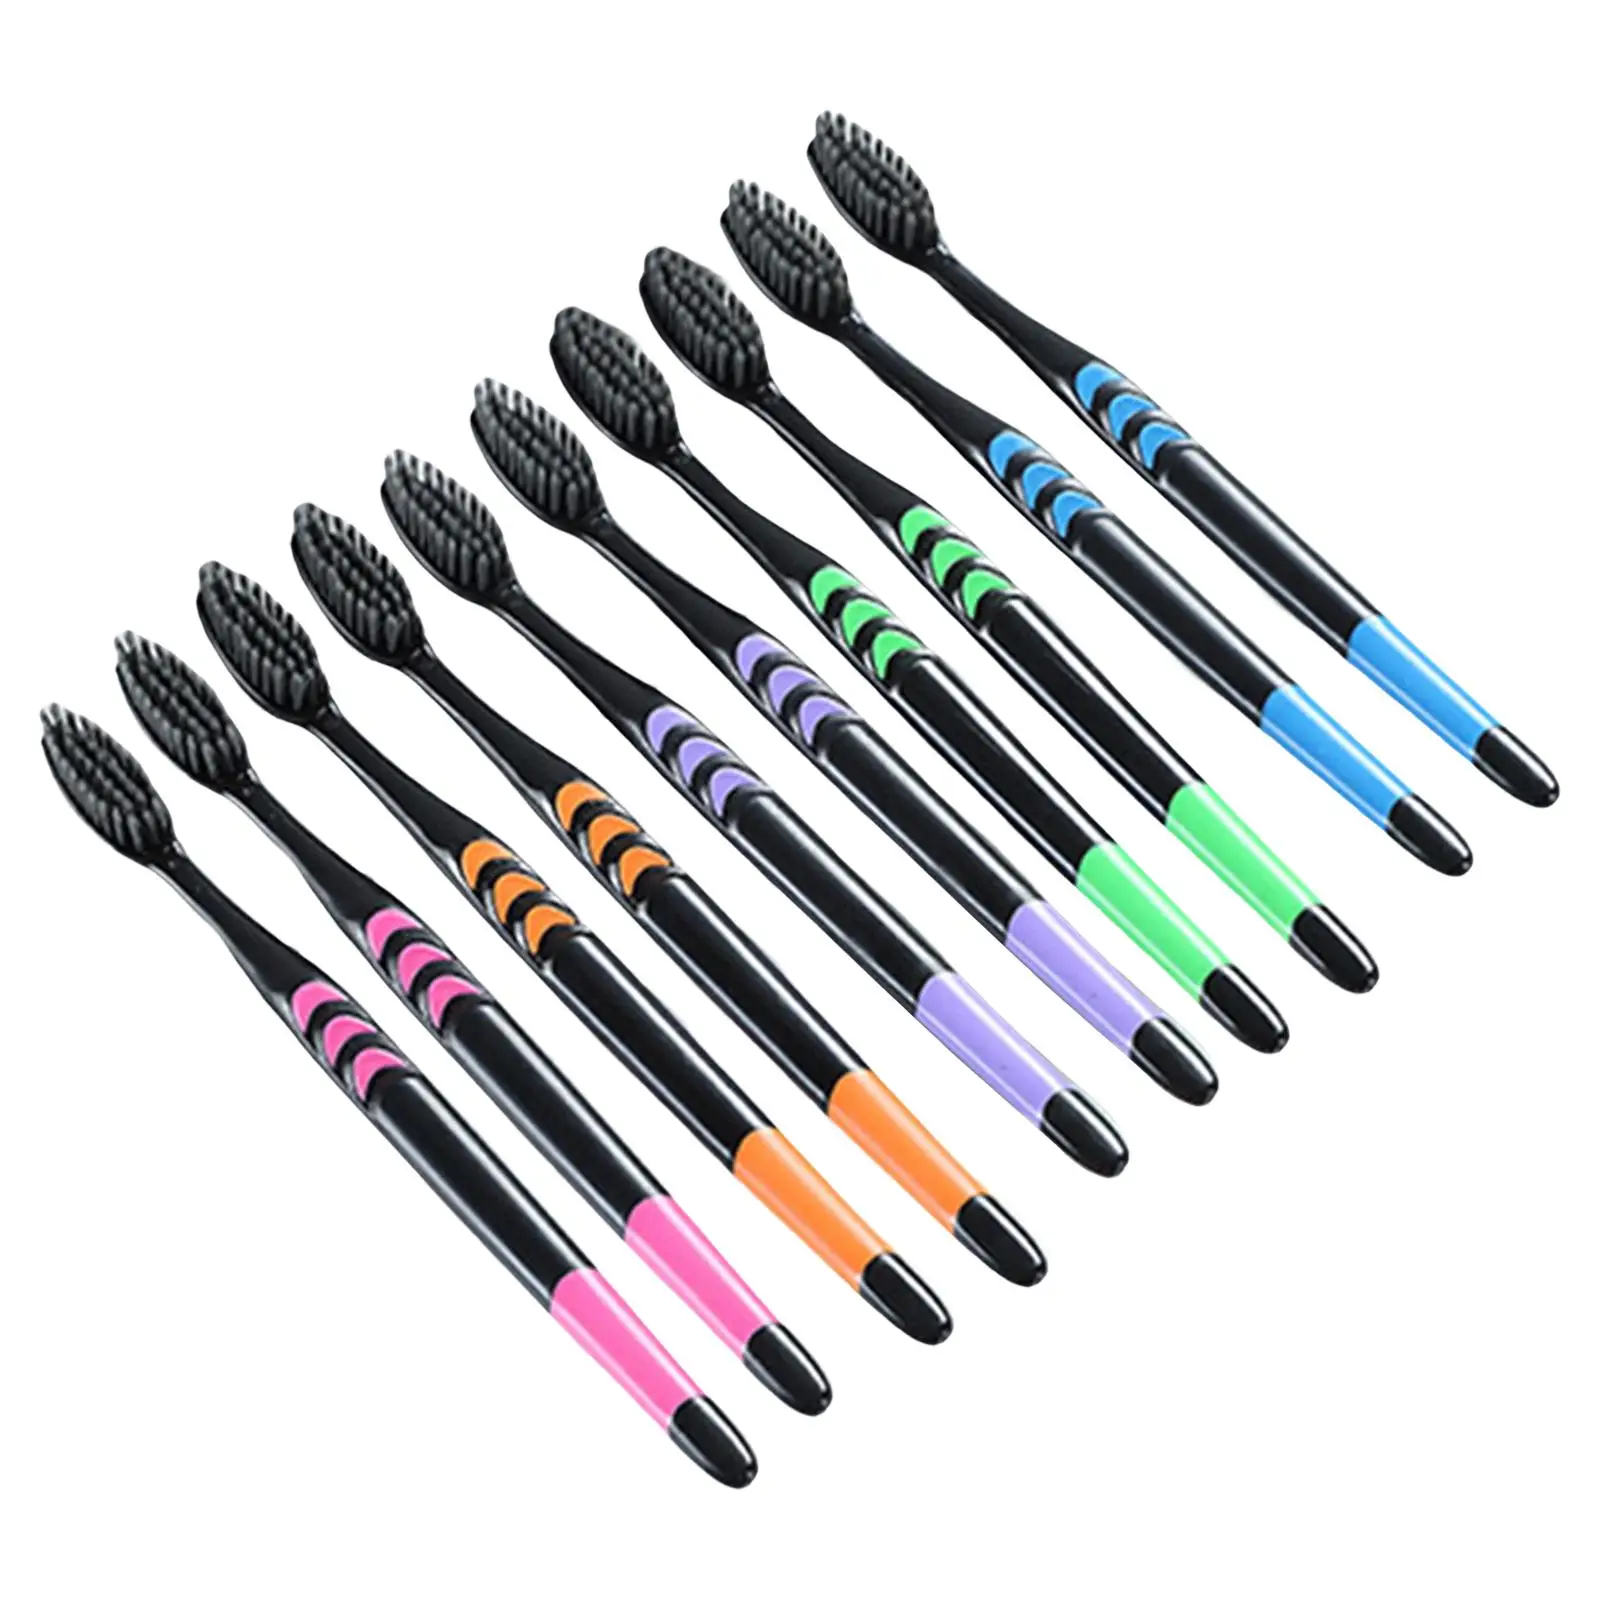 10 Pieces Toothbrush Protection Gum Care Excellent Cleaning Effect Gentle Manual Toothbrushes for Sensitive Teeth Gum Recession